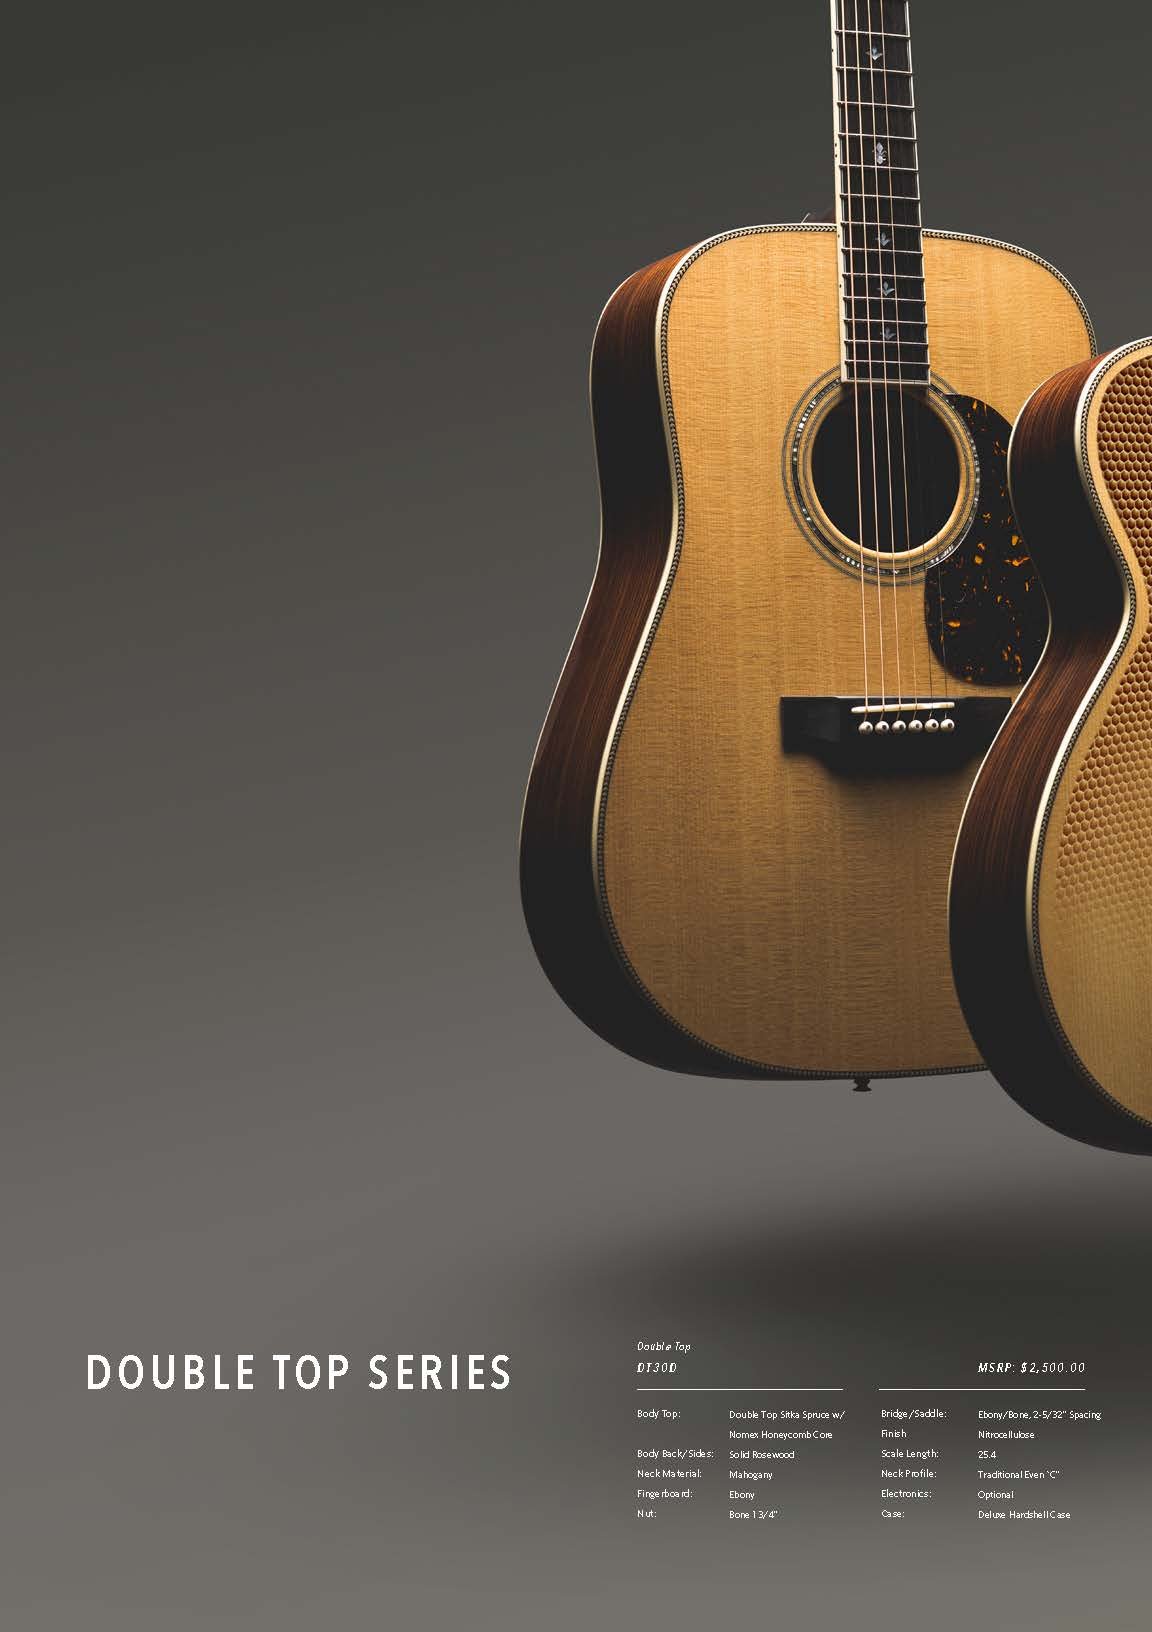 James Sullivan Photography for Eastman Music, Double Top Series